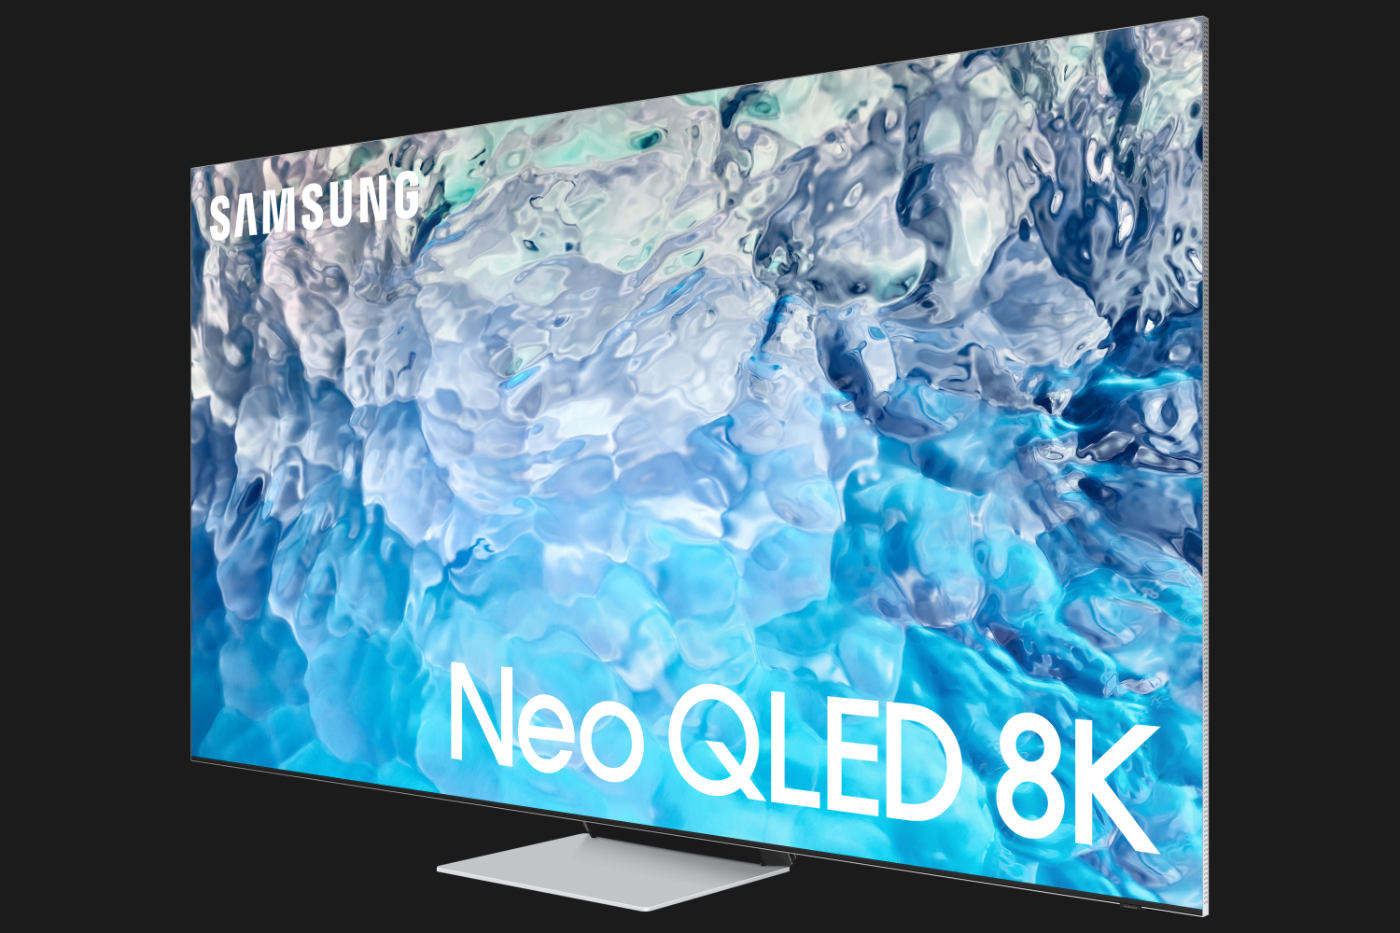 8K TVs may be dead